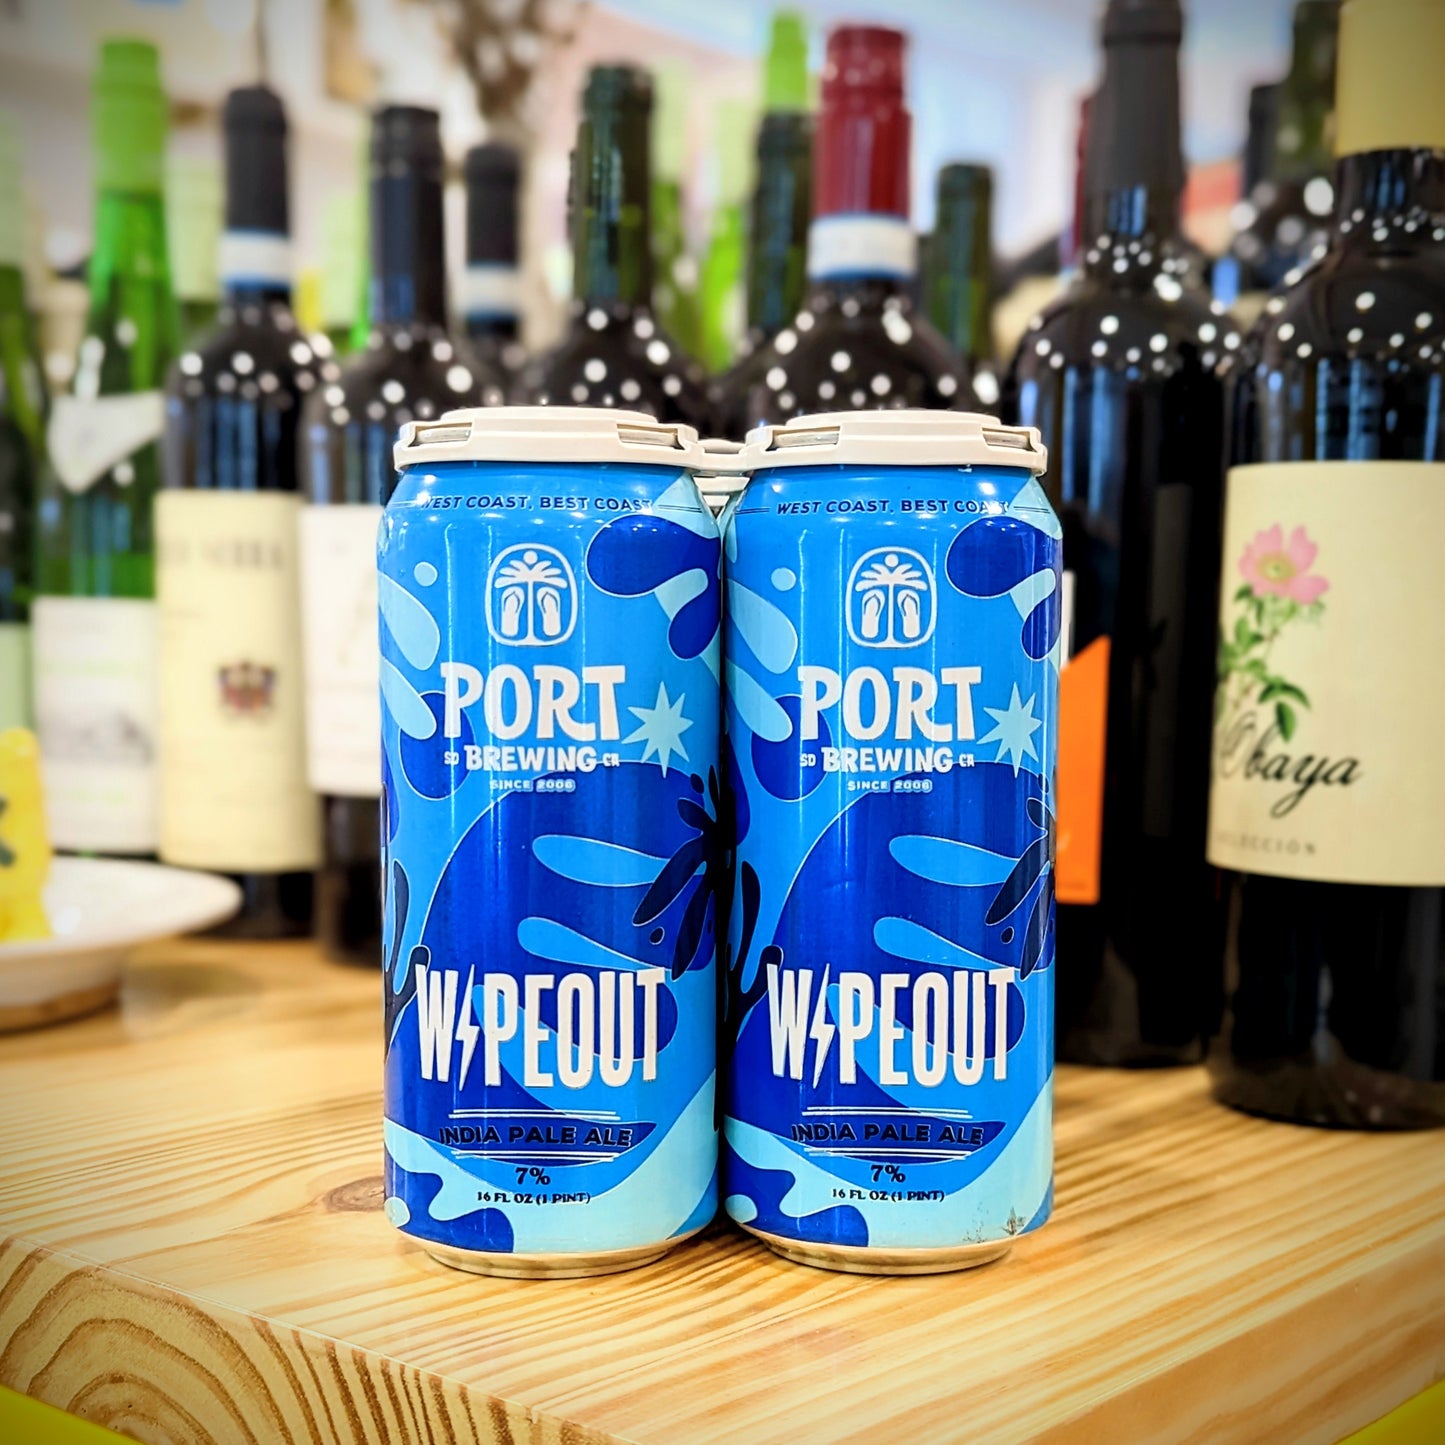 Wipeout IPA - Port Brewing Company